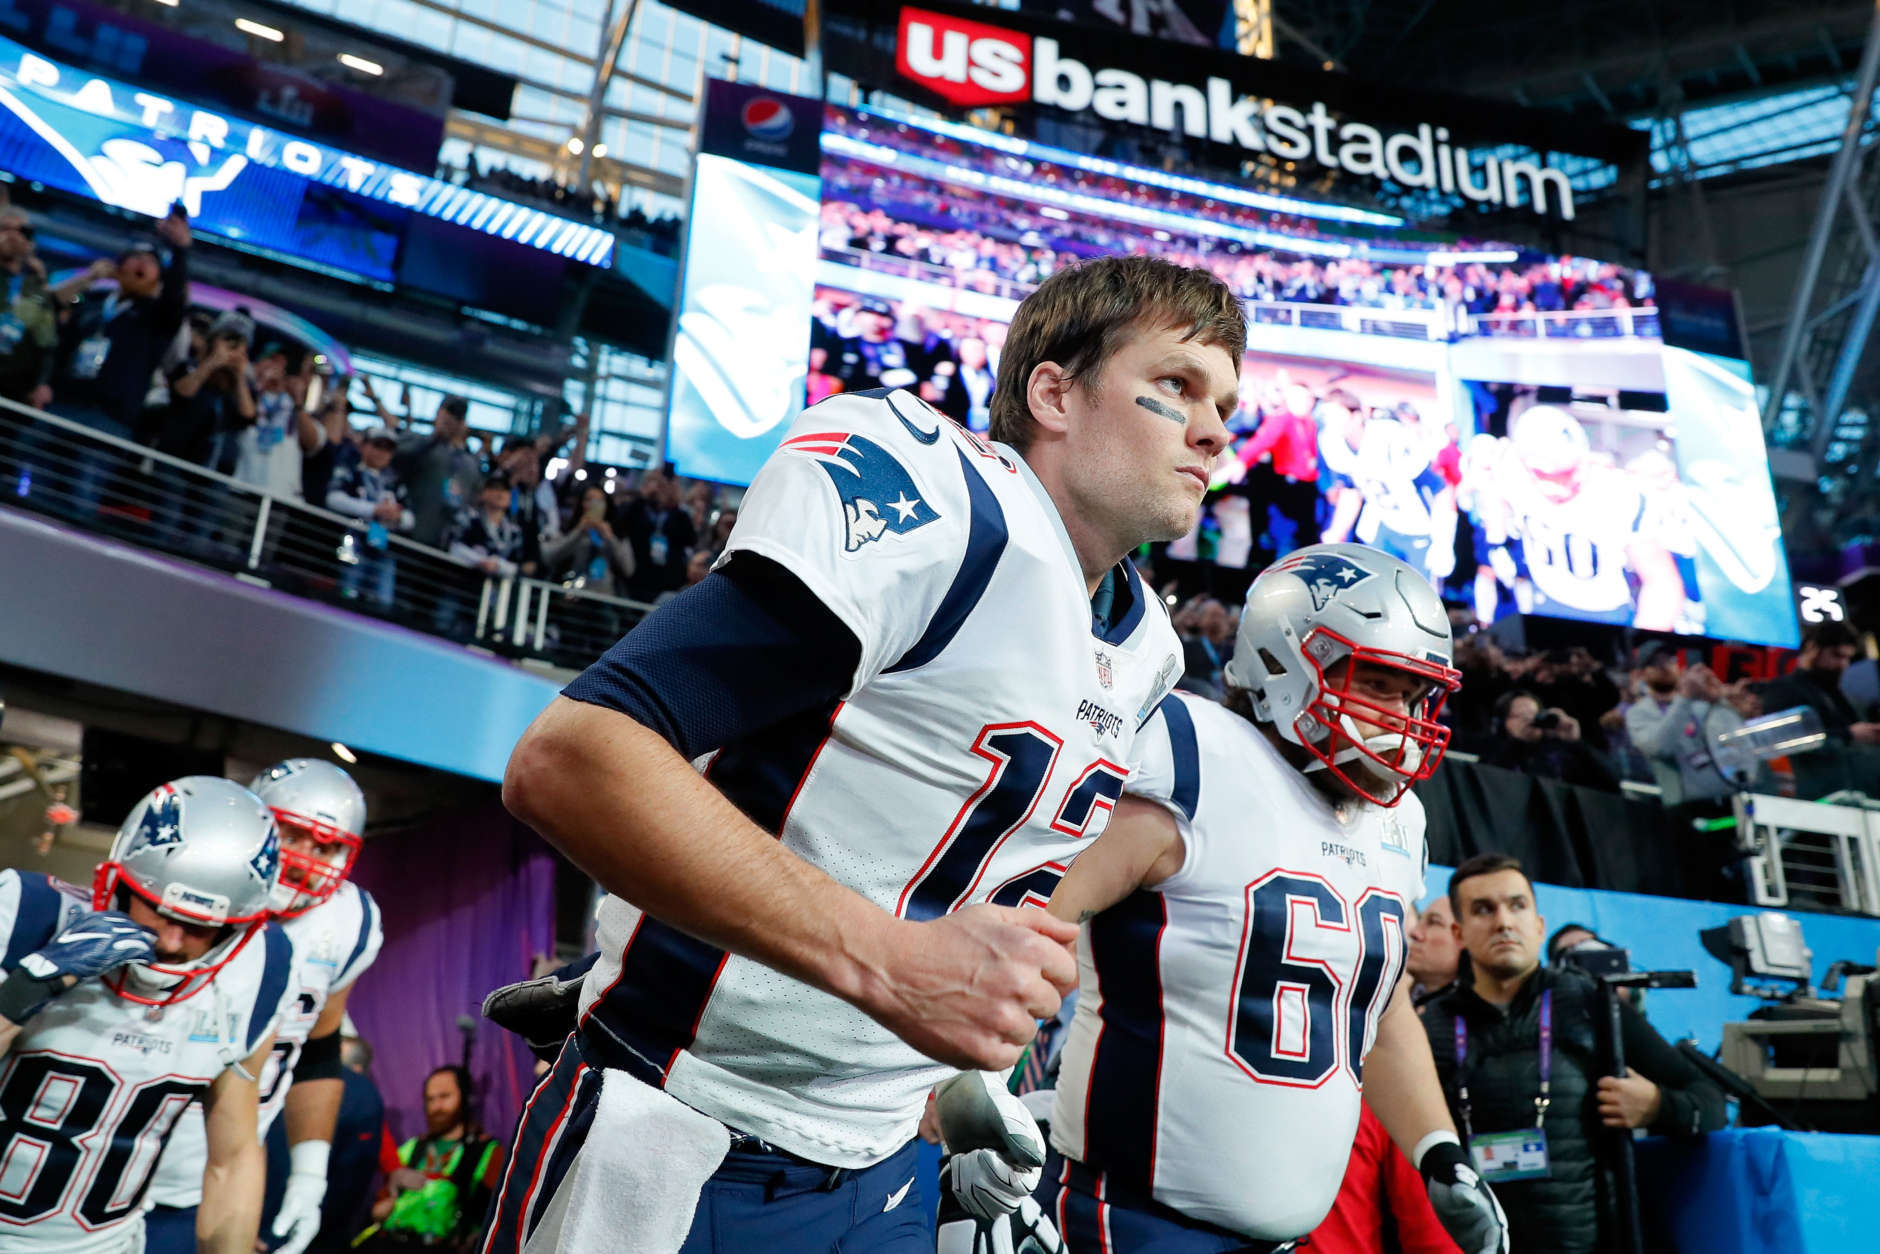 MINNEAPOLIS, MN - FEBRUARY 04:  Tom Brady #12 of the New England Patriots takes the field prior to Super Bowl LII against the Philadelphia Eagles at U.S. Bank Stadium on February 4, 2018 in Minneapolis, Minnesota.  (Photo by Kevin C. Cox/Getty Images)